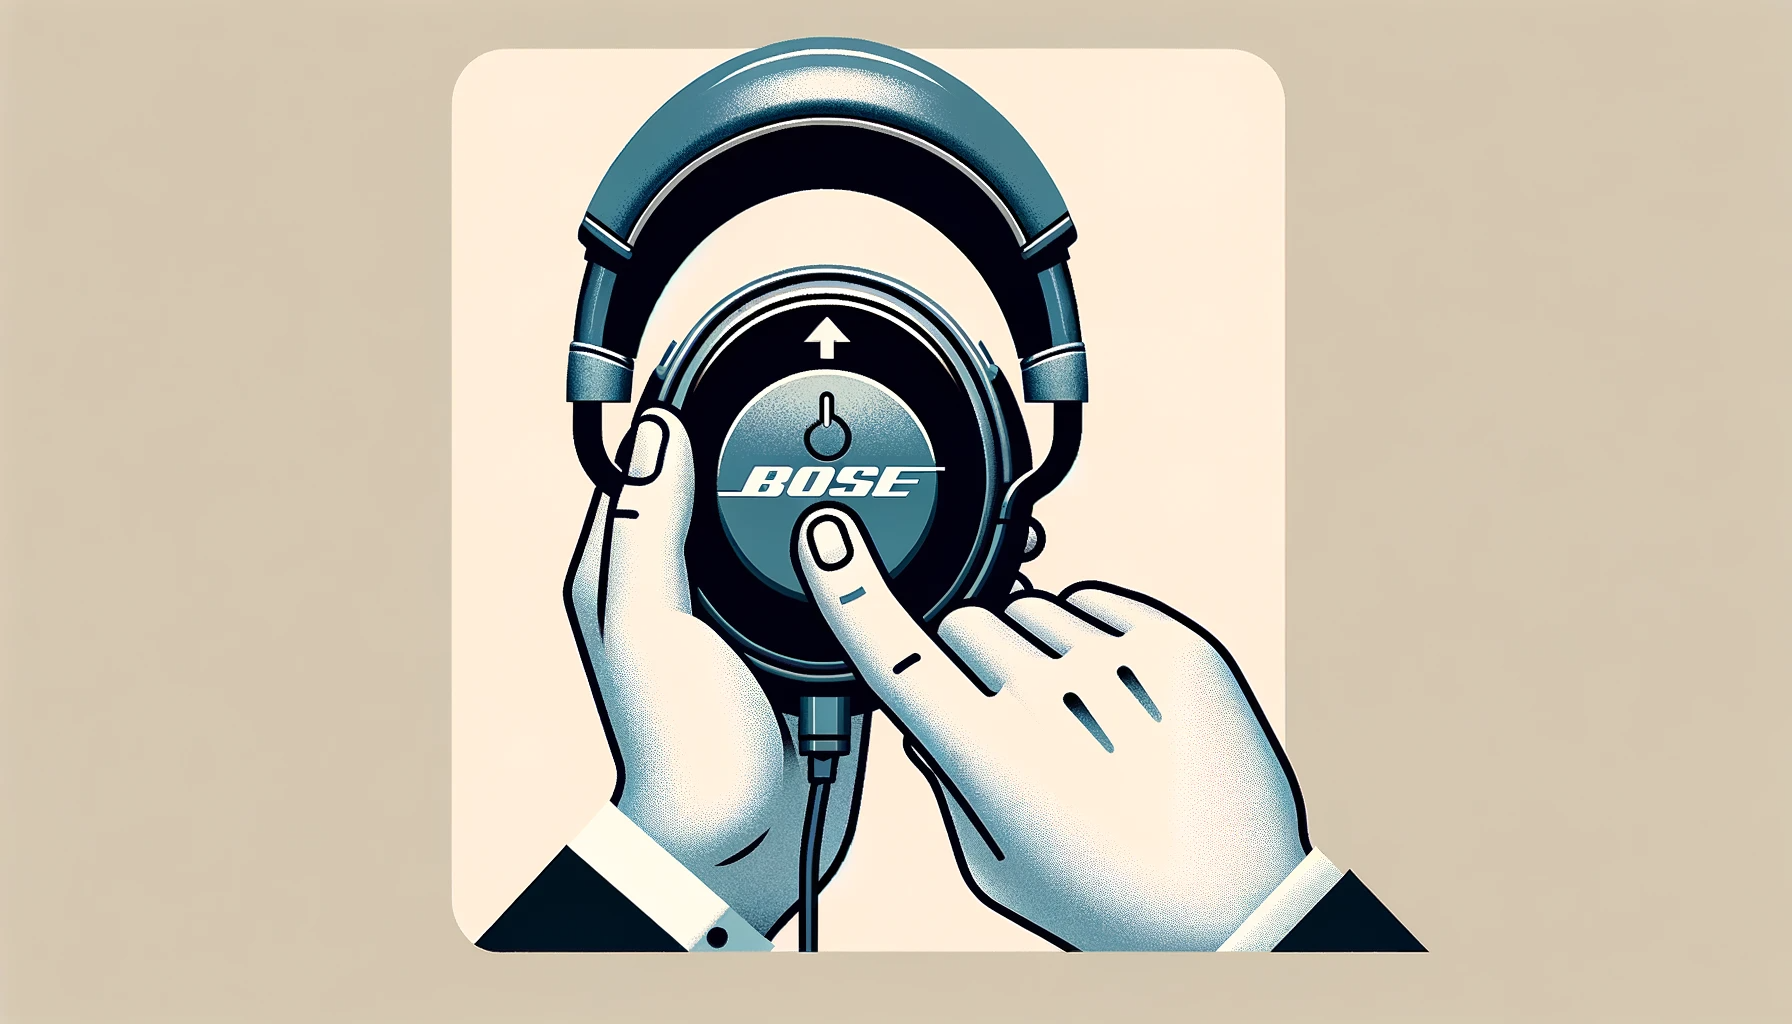 How to Turn on Bose Headphones? A Step-by-Step Guide!